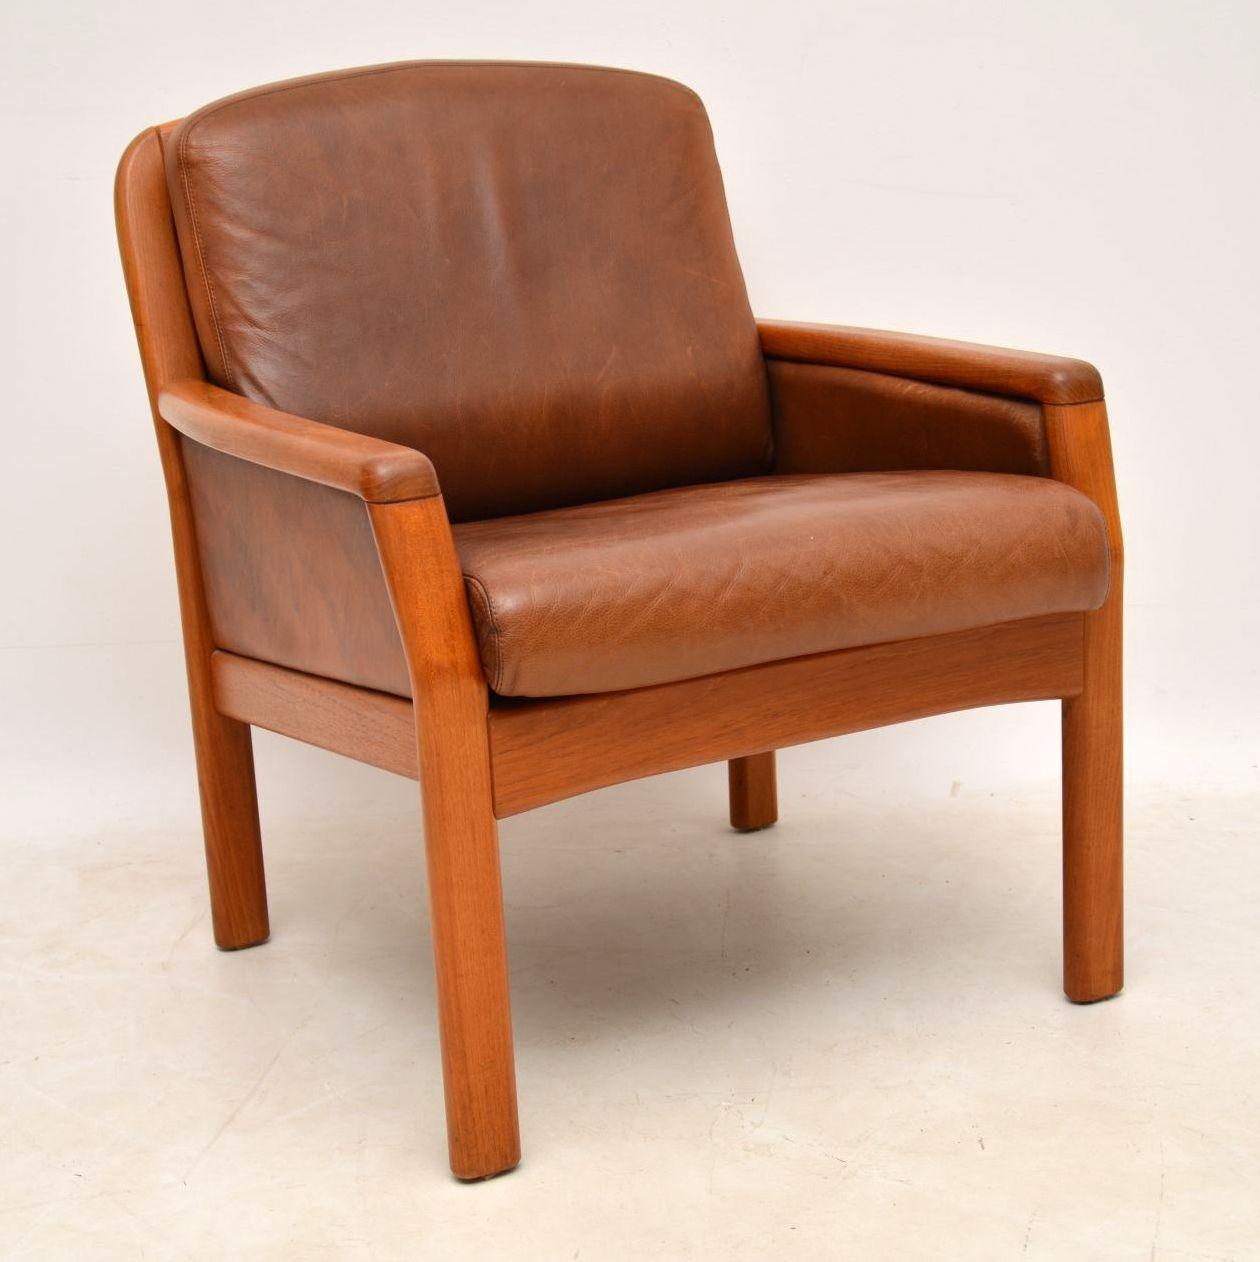 A stylish, top quality and very comfortable pair of vintage Danish armchairs, these were made by Dyrlund, they date from the 1960s-1970s. They are in very good condition for their age, the brown leather has a lovely patina, with some light surface